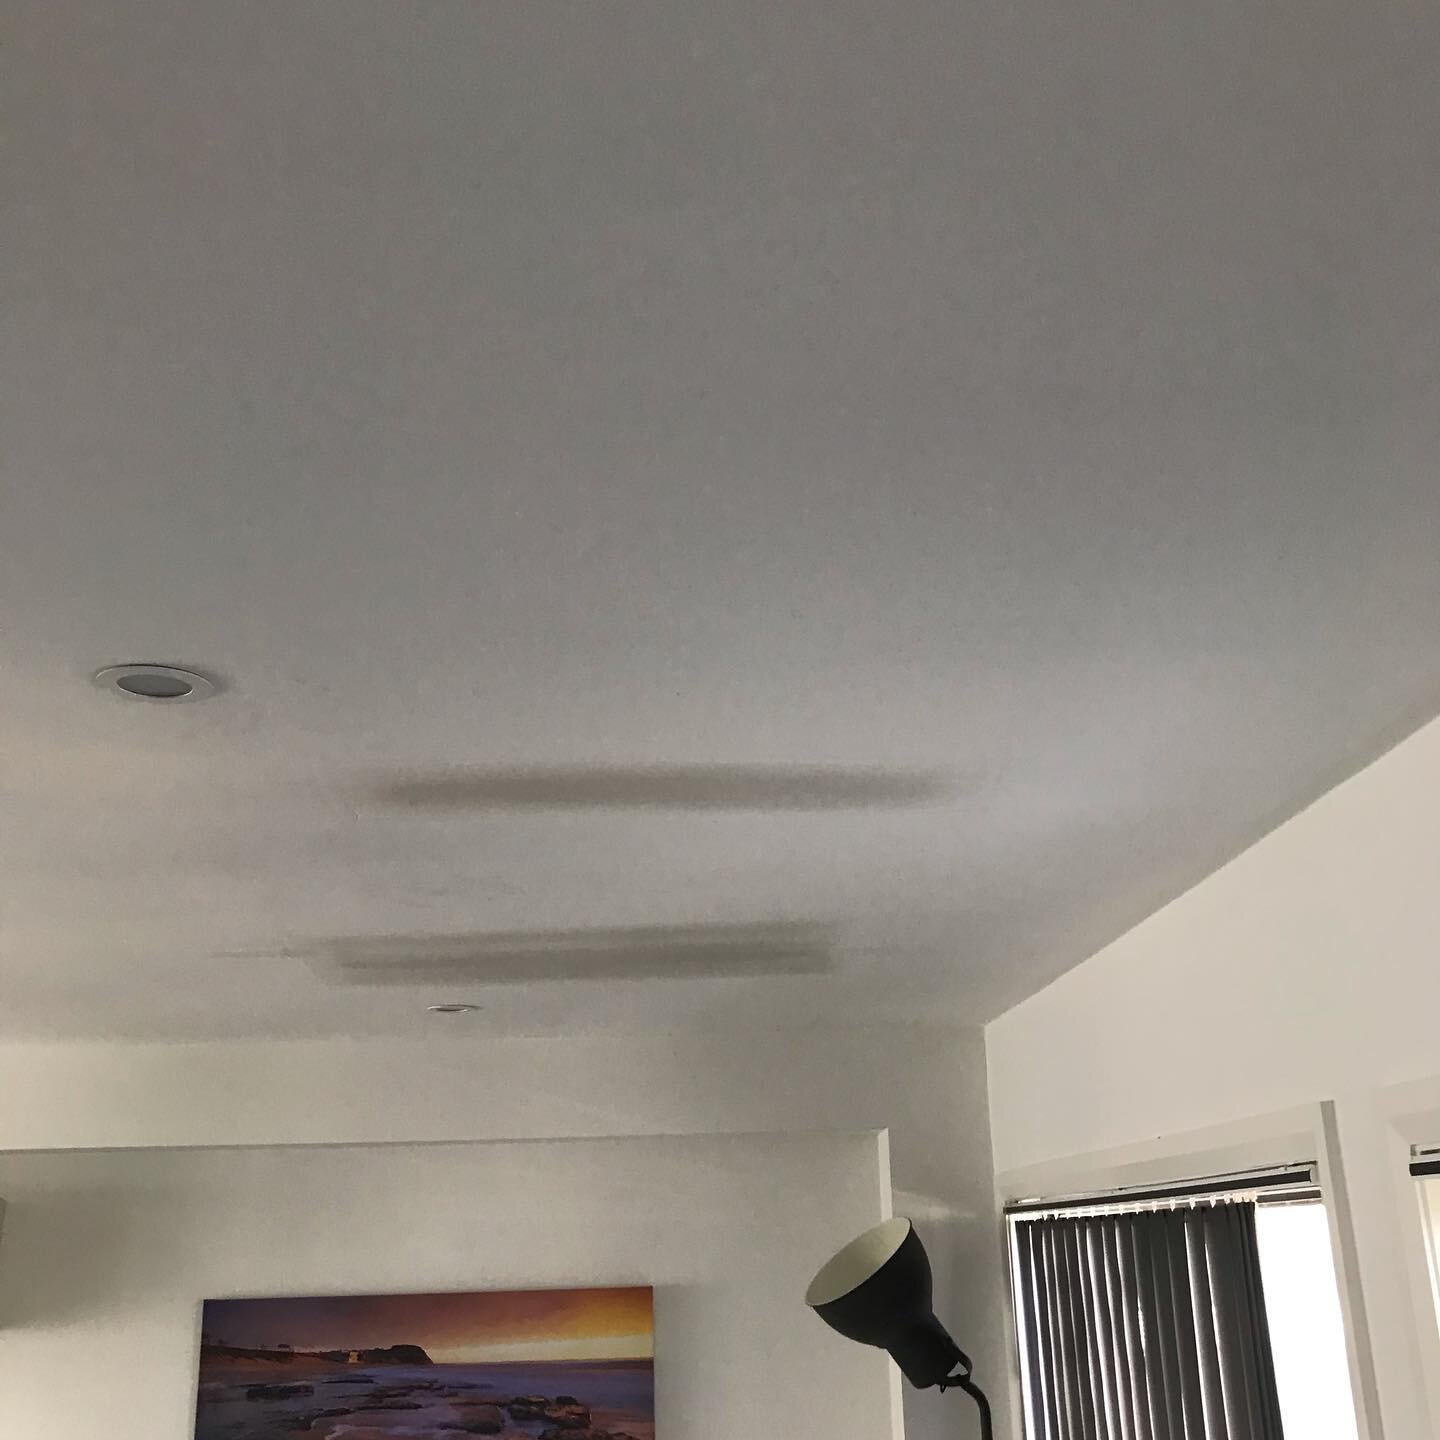 Water damaged ceilings aren&rsquo;t always a big problem. 
If we can address it quickly sometimes it&rsquo;s just a matter of patching a small area

This apartment in Waratah was a quick and inexpensive repair. 
#plasterer
#gyprocker
#ceilingrepair
#